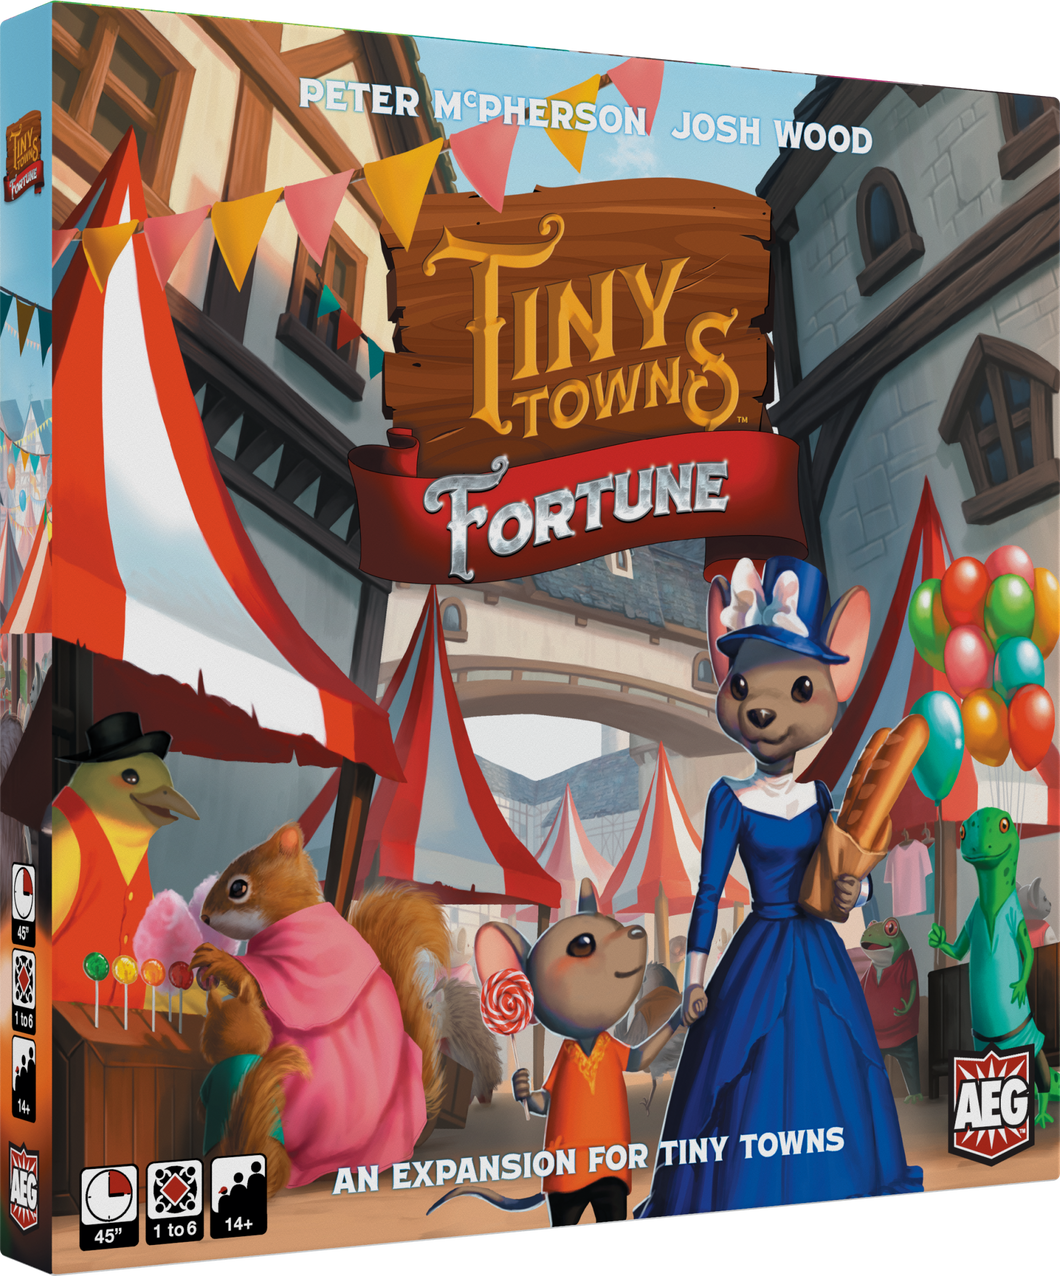 Tiny Towns - Fortune